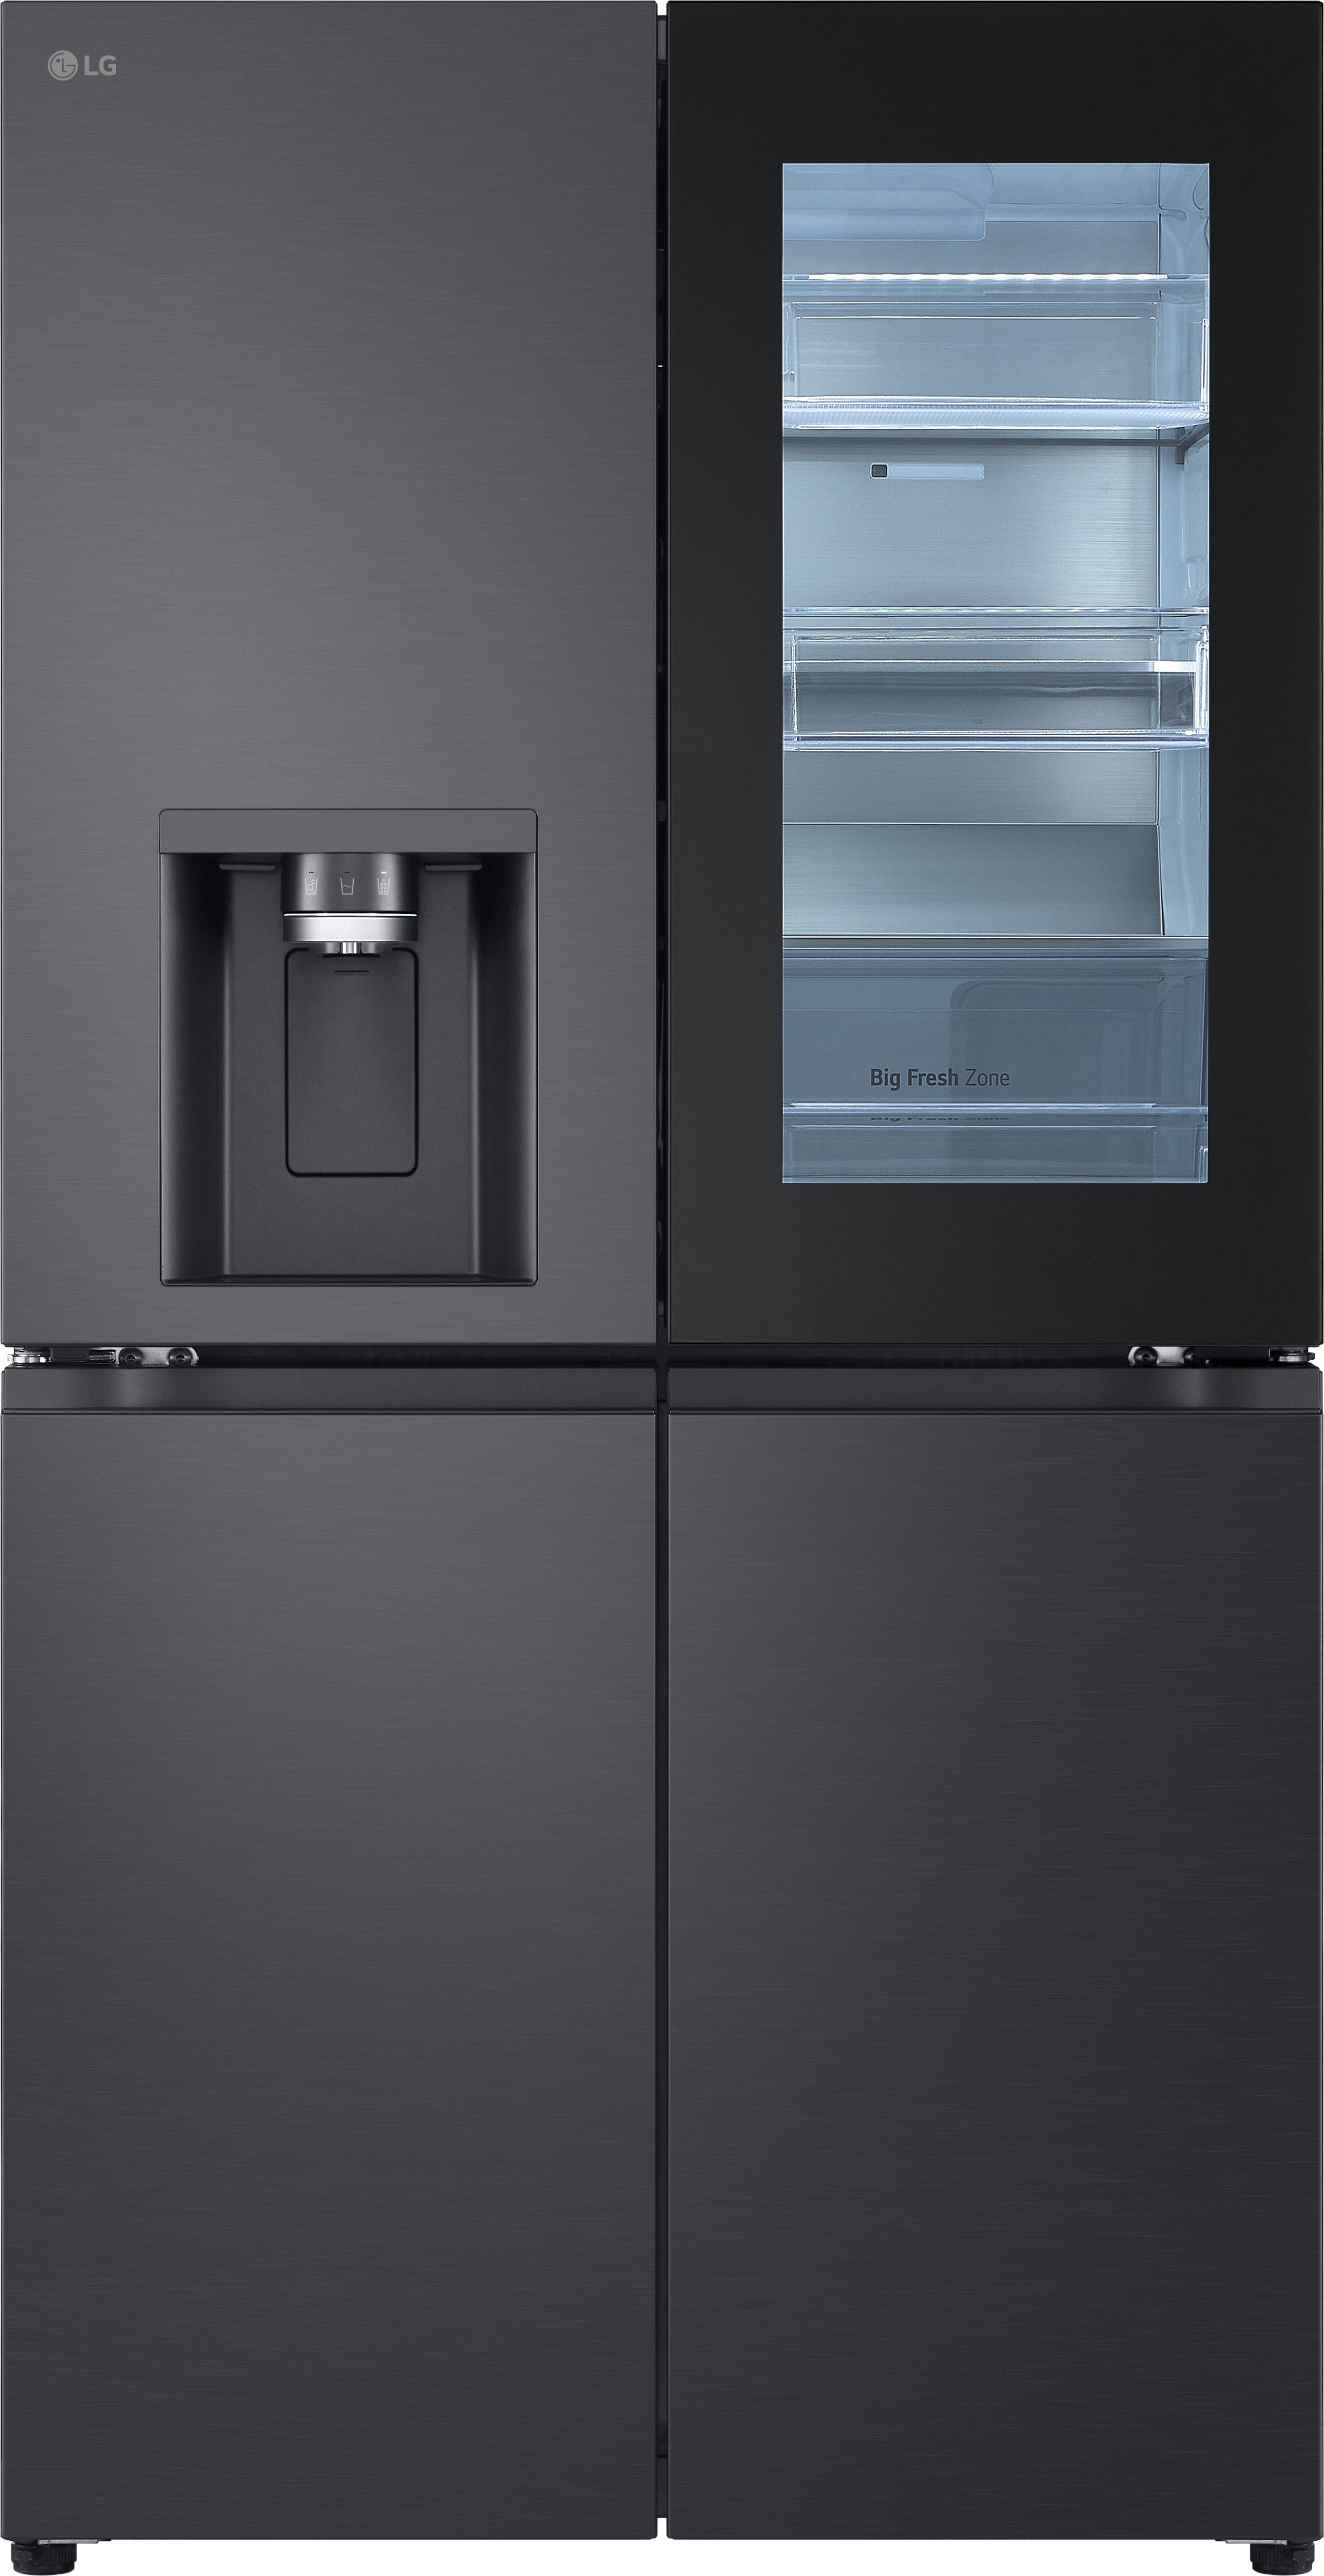 LG InstaView GMG960EVJE Wifi Connected Plumbed Frost Free American Fridge Freezer - Matte Black - E Rated, Black